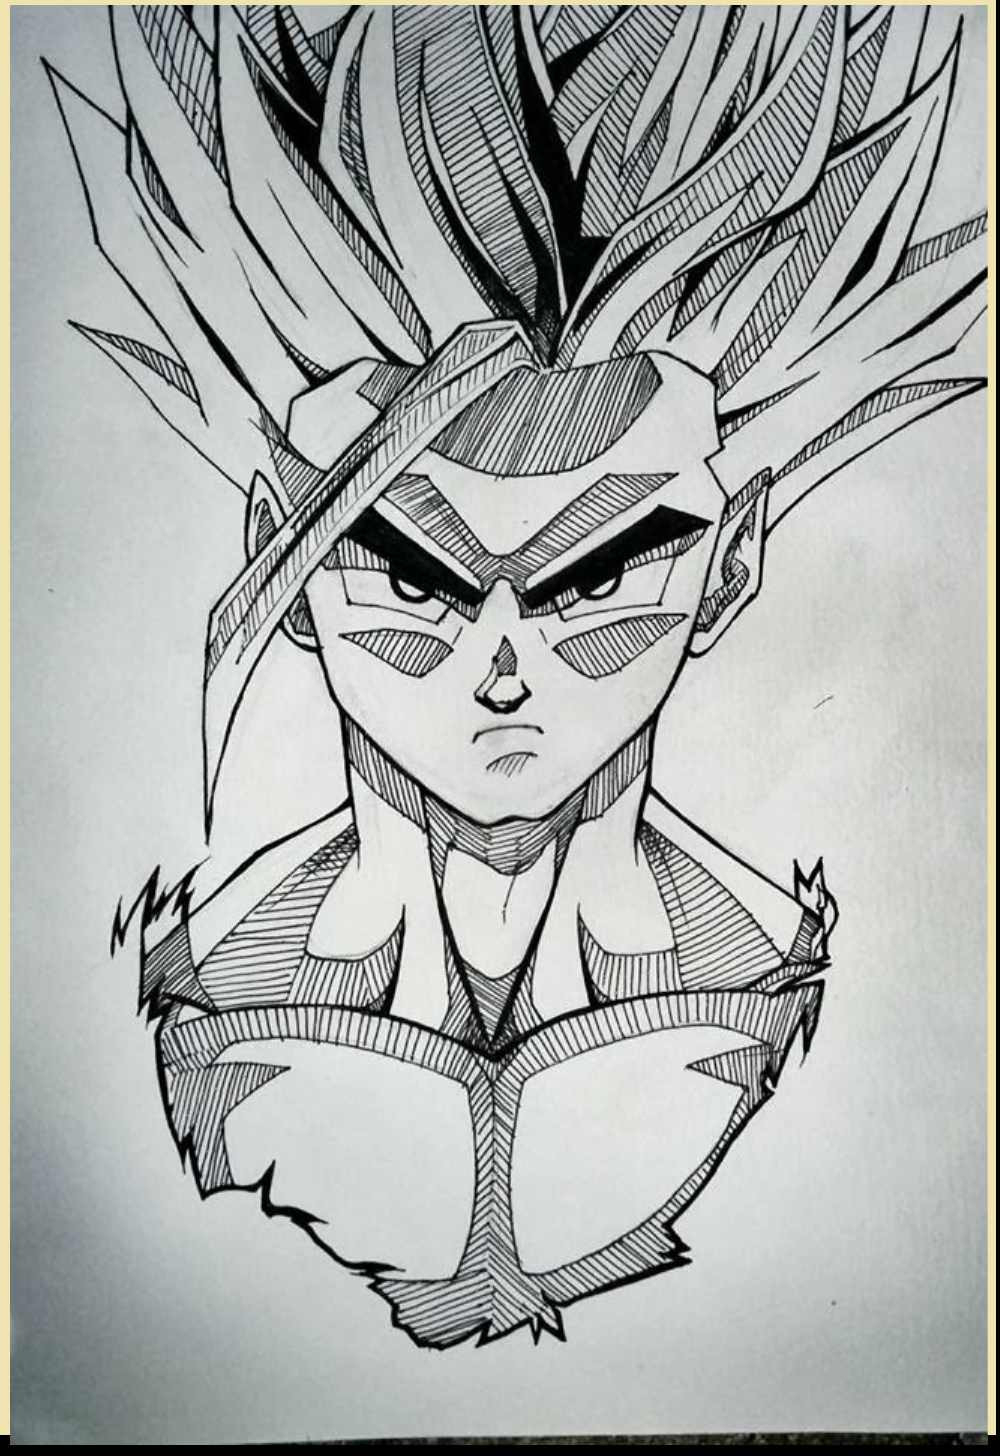 Dragon Ball Z Characters Drawings In Pencil - Drawing Art Ideas